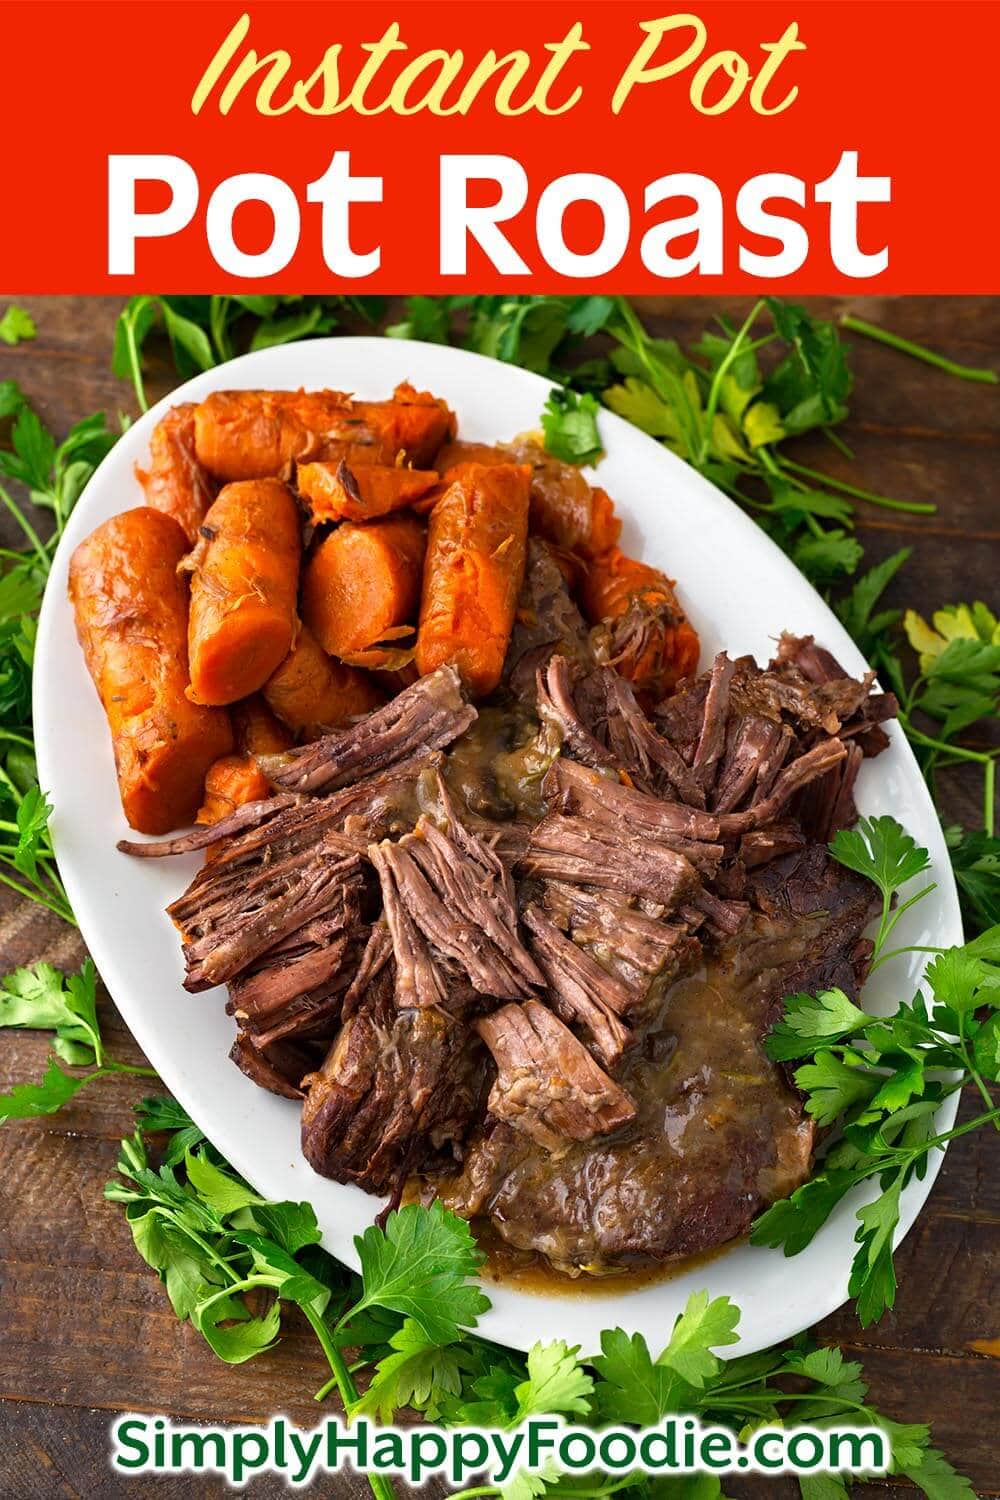 Instant Pot Pot Roast is a rich, delicious classic pot roast recipe. Pressure cooker pot roast is fall apart tender, with veggies and a tasty gravy. This Instant Pot pot roast dinner is ready in less than 2 hours! Instant Pot recipes by simplyhappyfoodie.com #instantpotpotroast #pressurecookerpotroast #instantpotroast